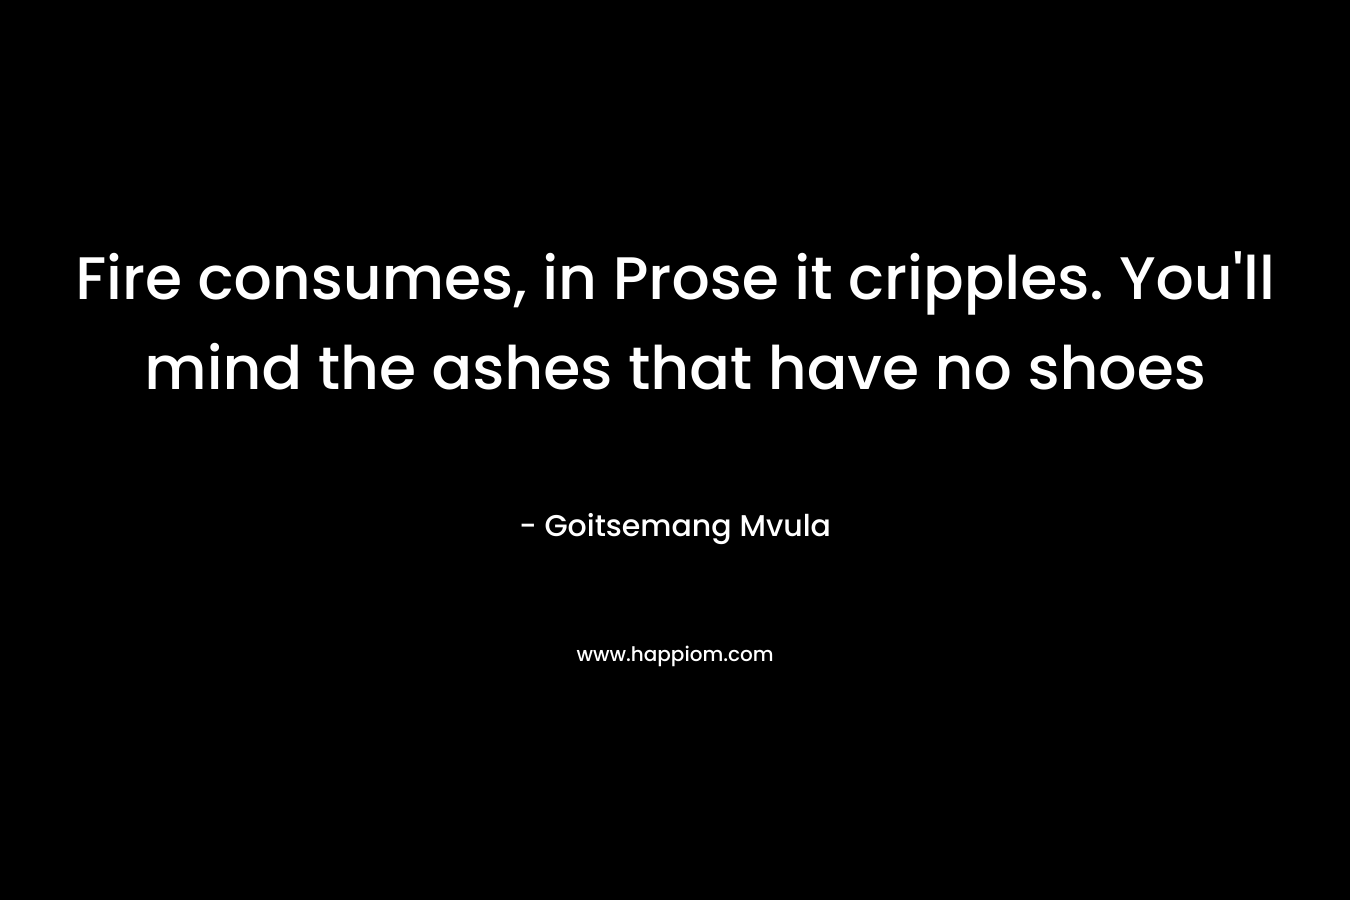 Fire consumes, in Prose it cripples. You’ll mind the ashes that have no shoes – Goitsemang Mvula